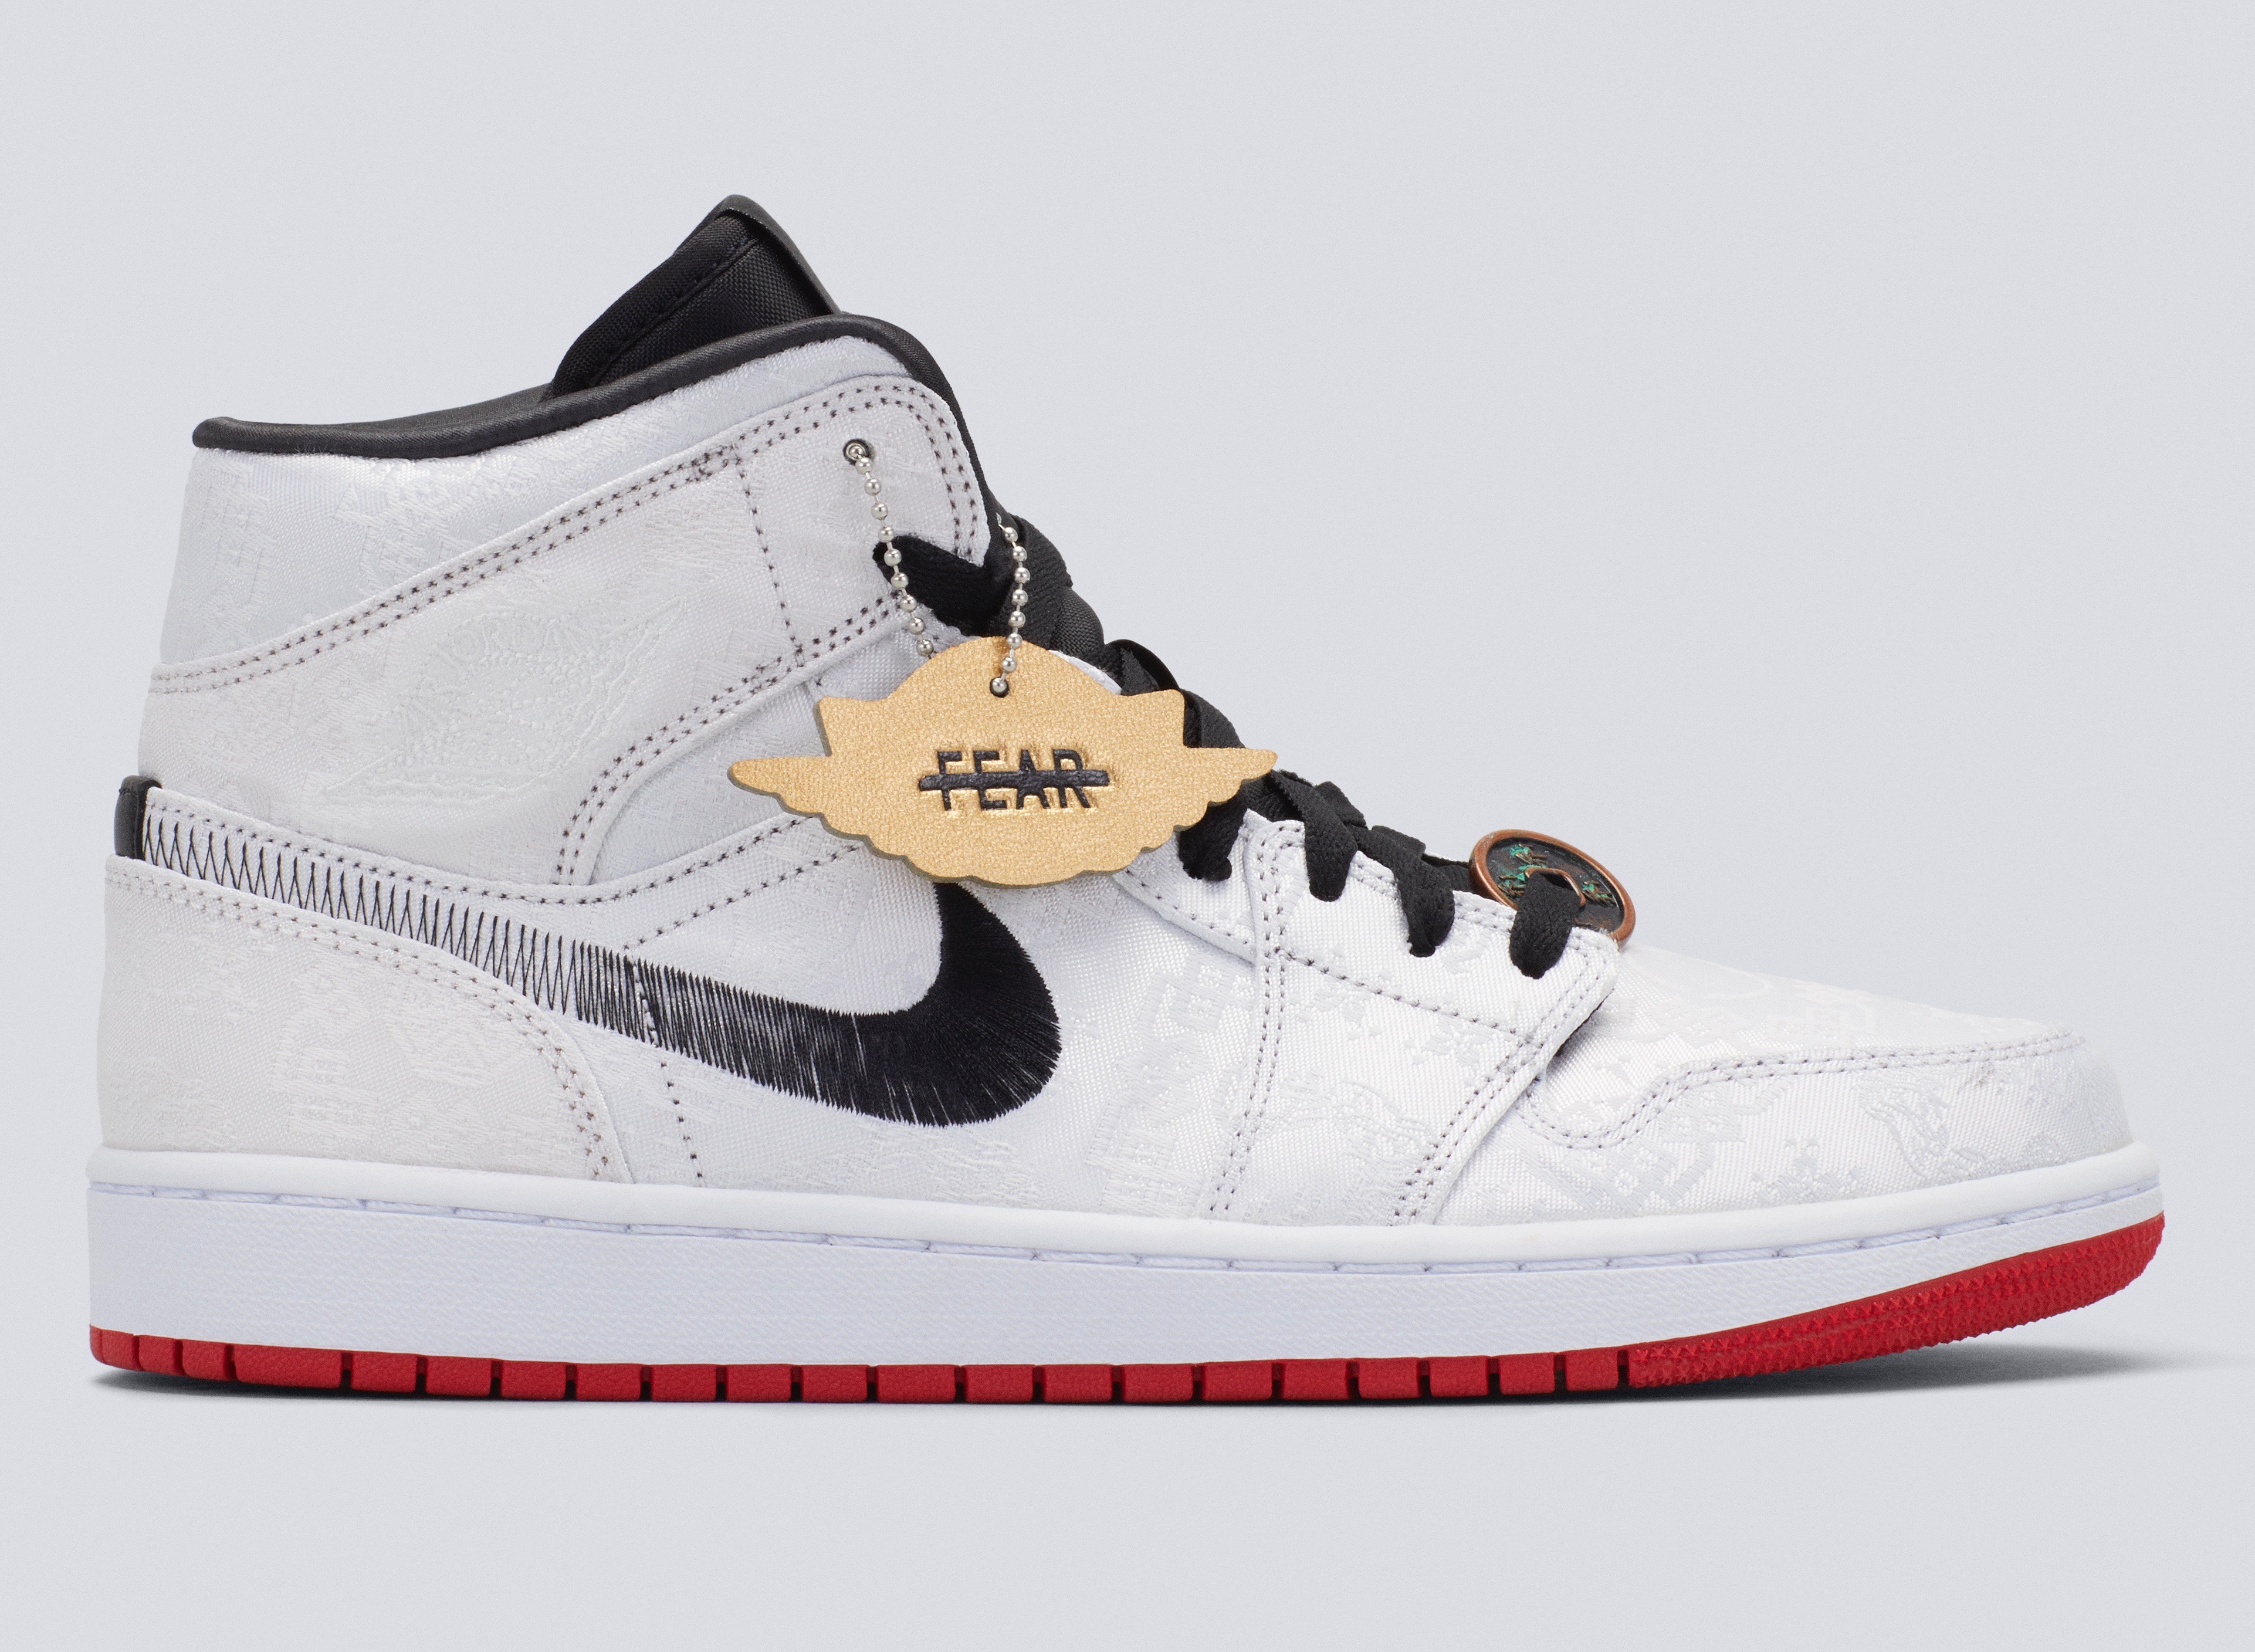 Cámara directorio Permitirse StockX on Twitter: "Jordan unleashes its final additions to the 'Fearless  Ones' collection with the Jordan 1 Mid SE Fearless Edison Chen CLOT and the Jordan  1 Retro High Fearless Zoom. Cop